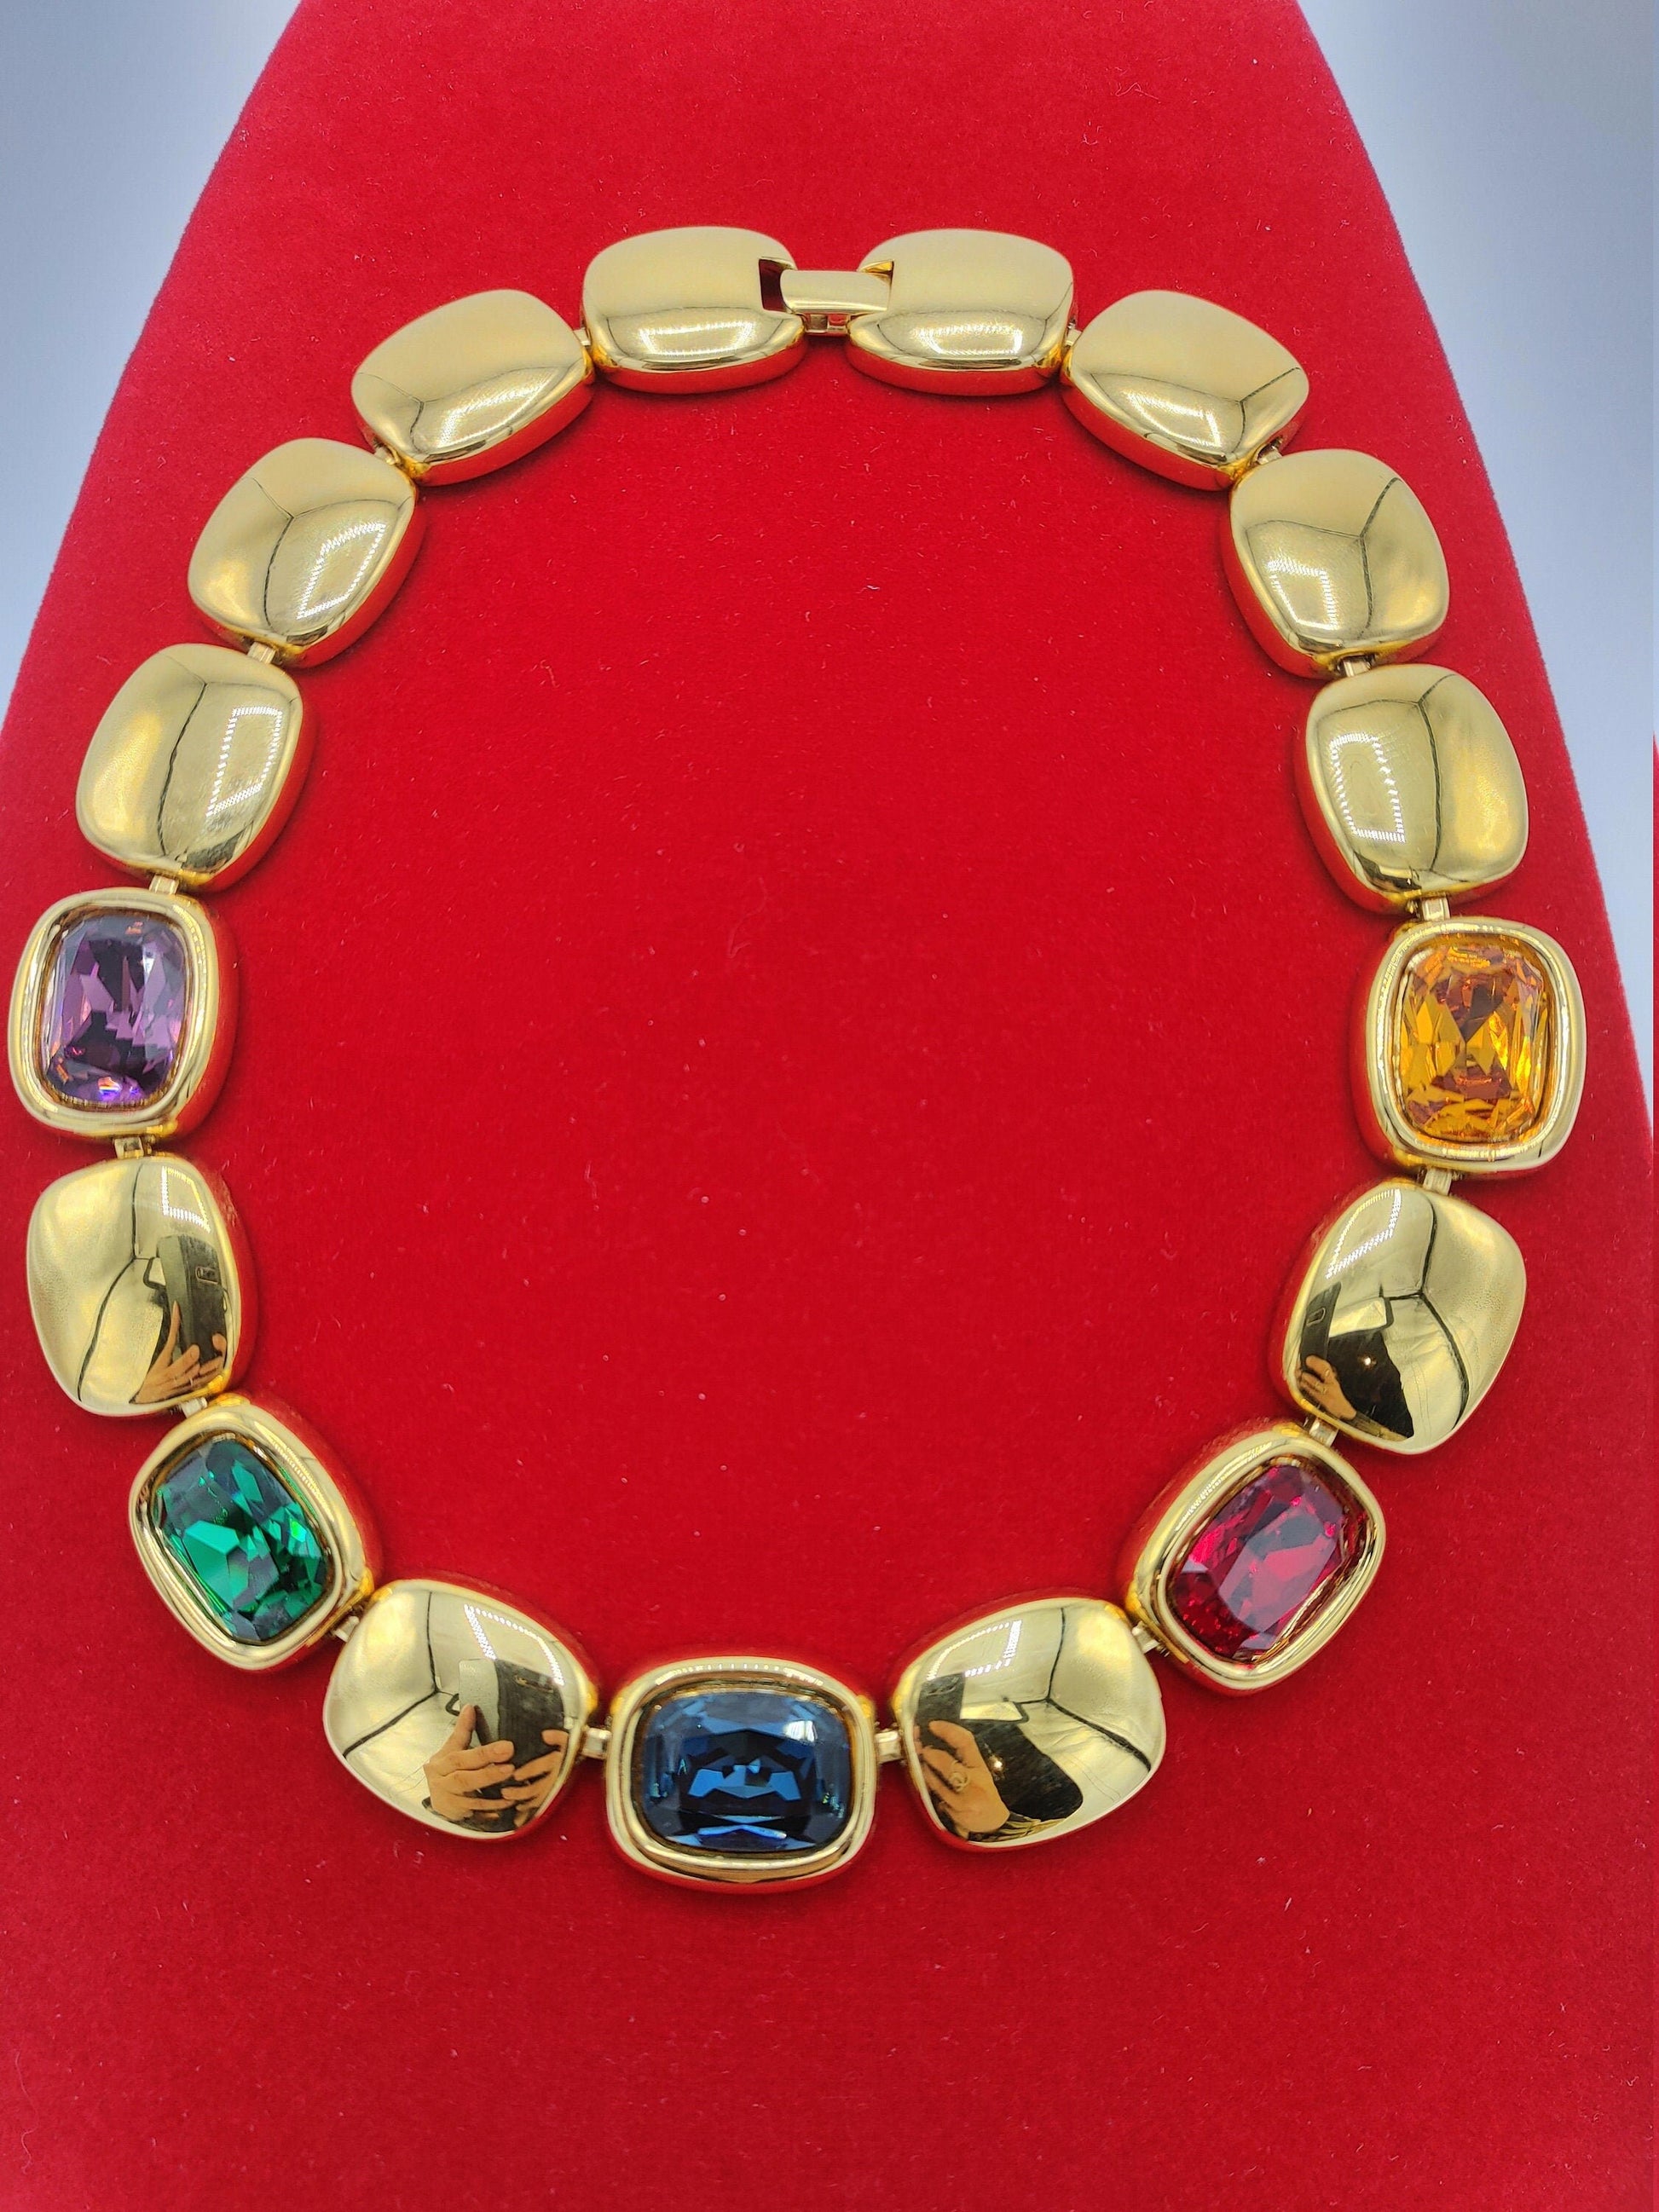 Vintage Runway NAPIER &quot;ROYALTON&quot; with Swarovski Jewel Tone Crystals Gold Plated Necklace Luxe